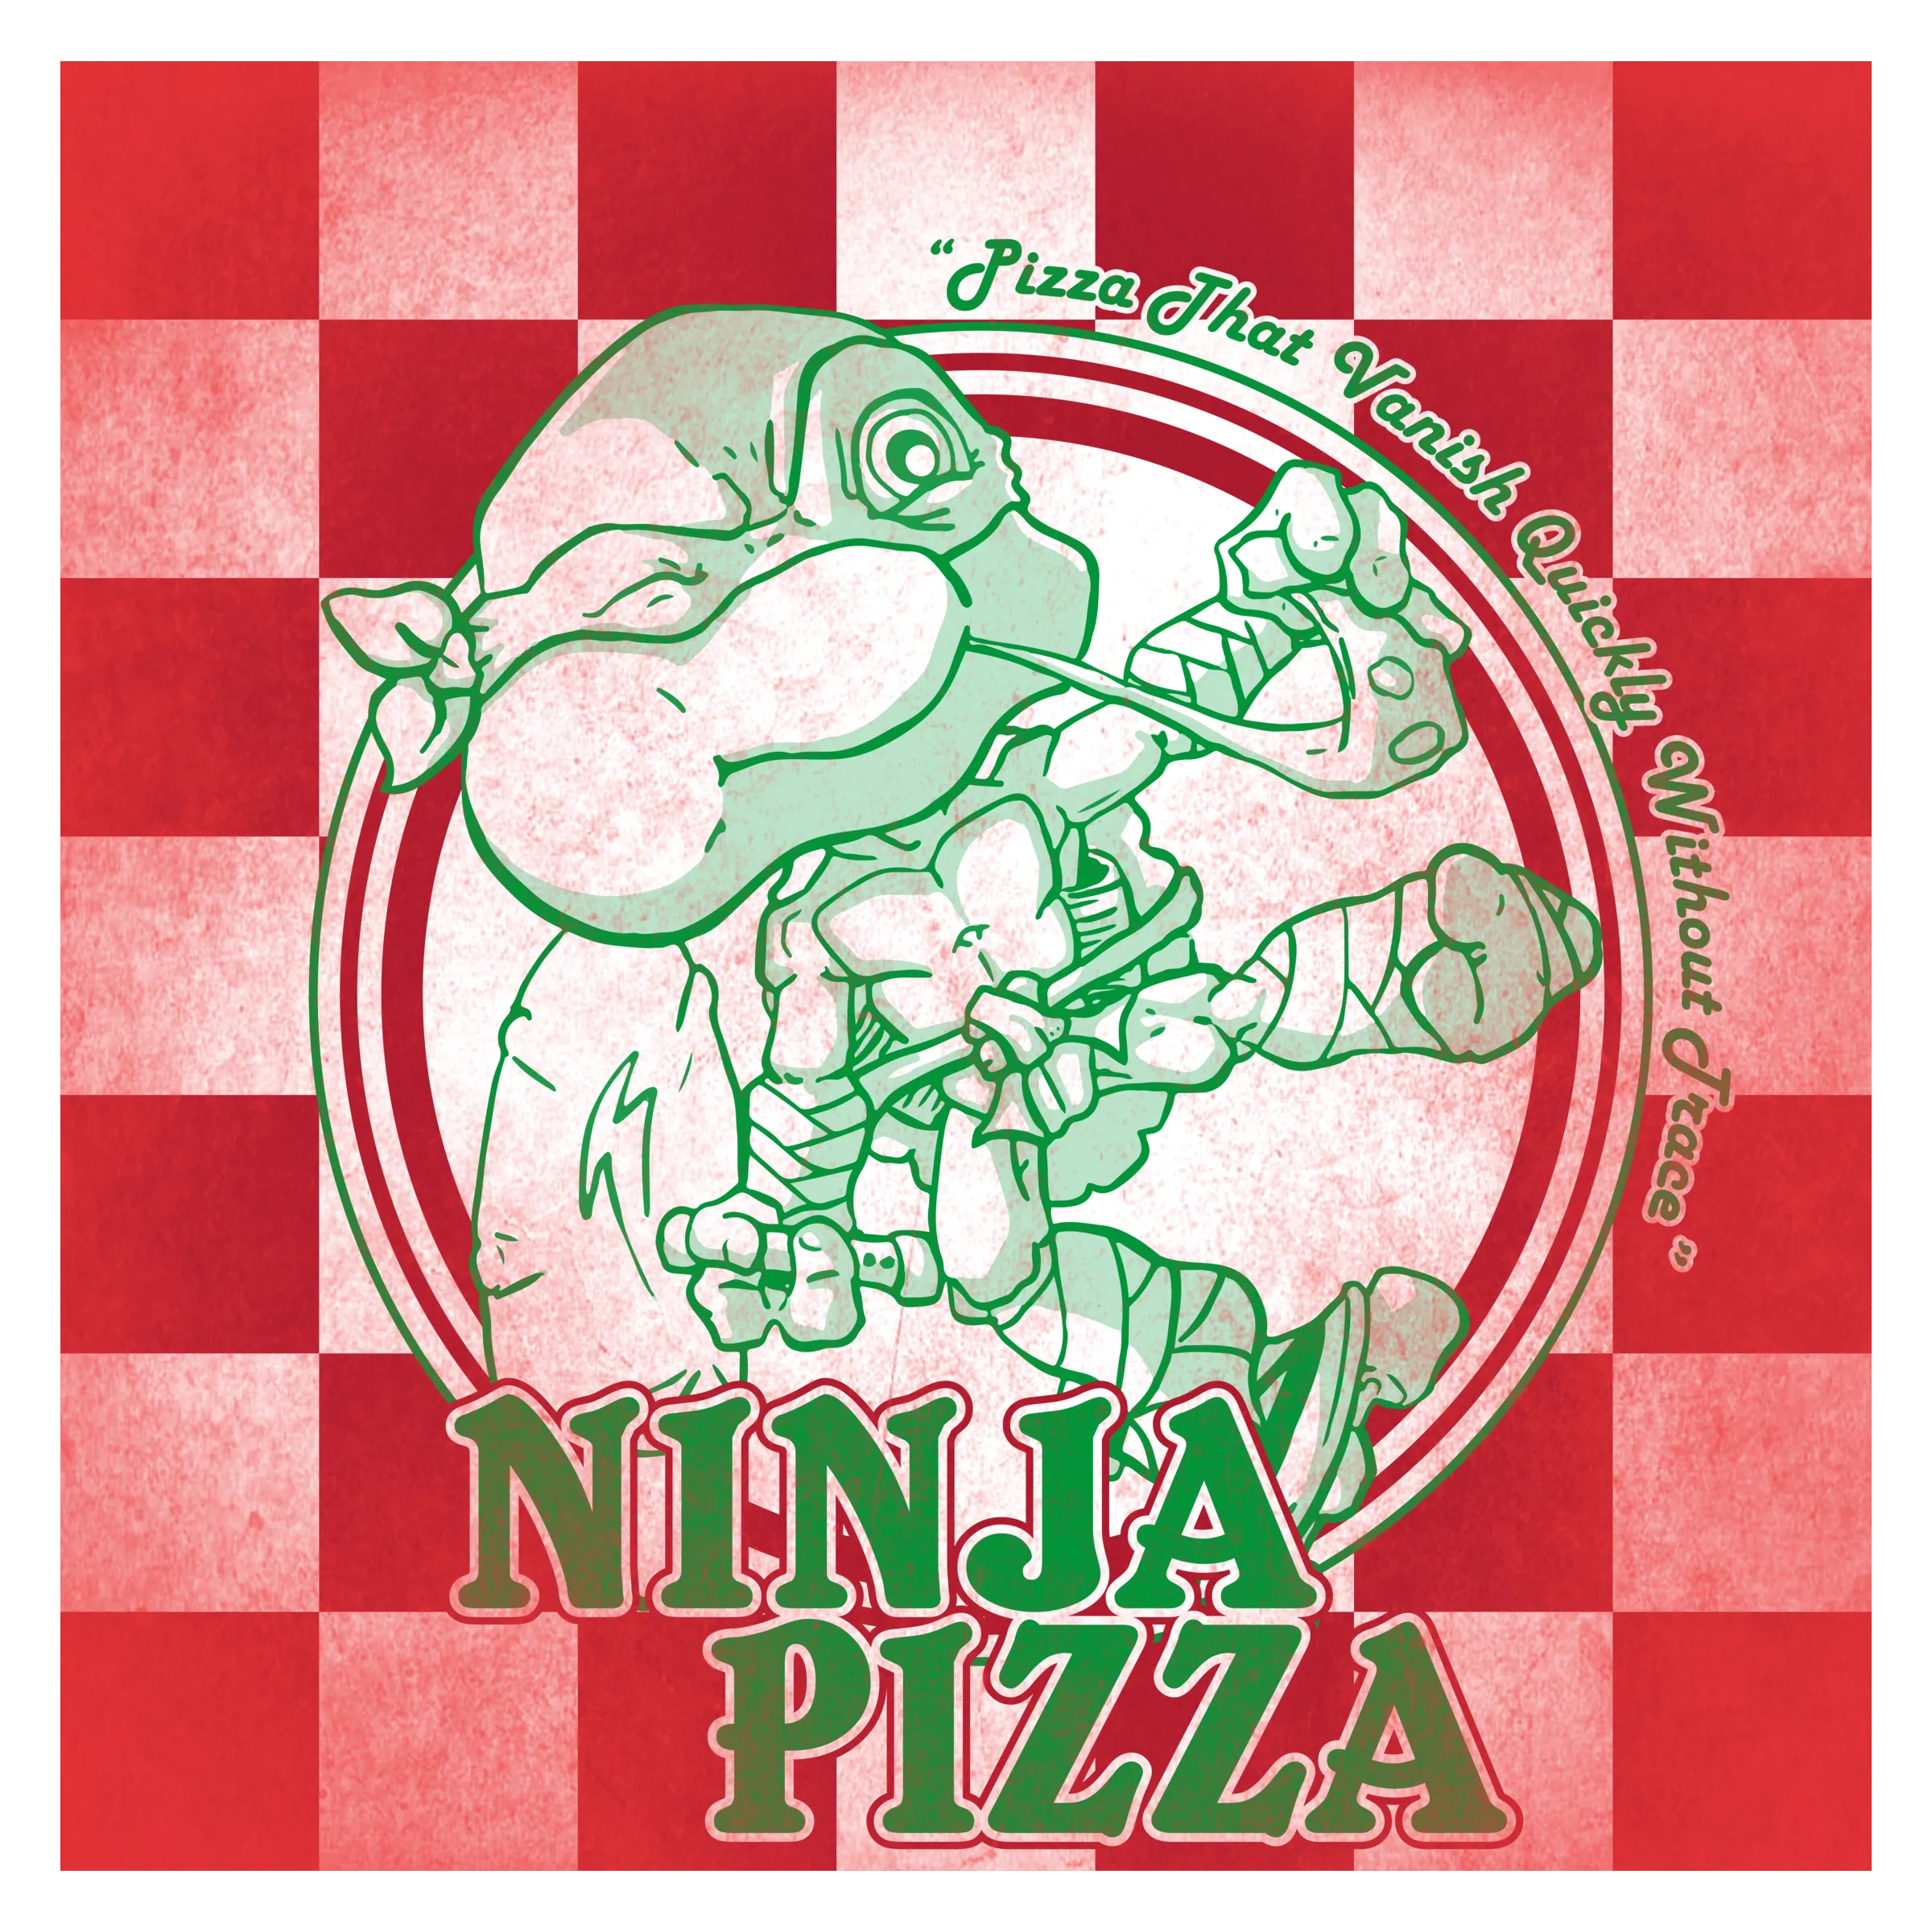 Ninja Pizza!” graphic phone case by Jacob Cecil.